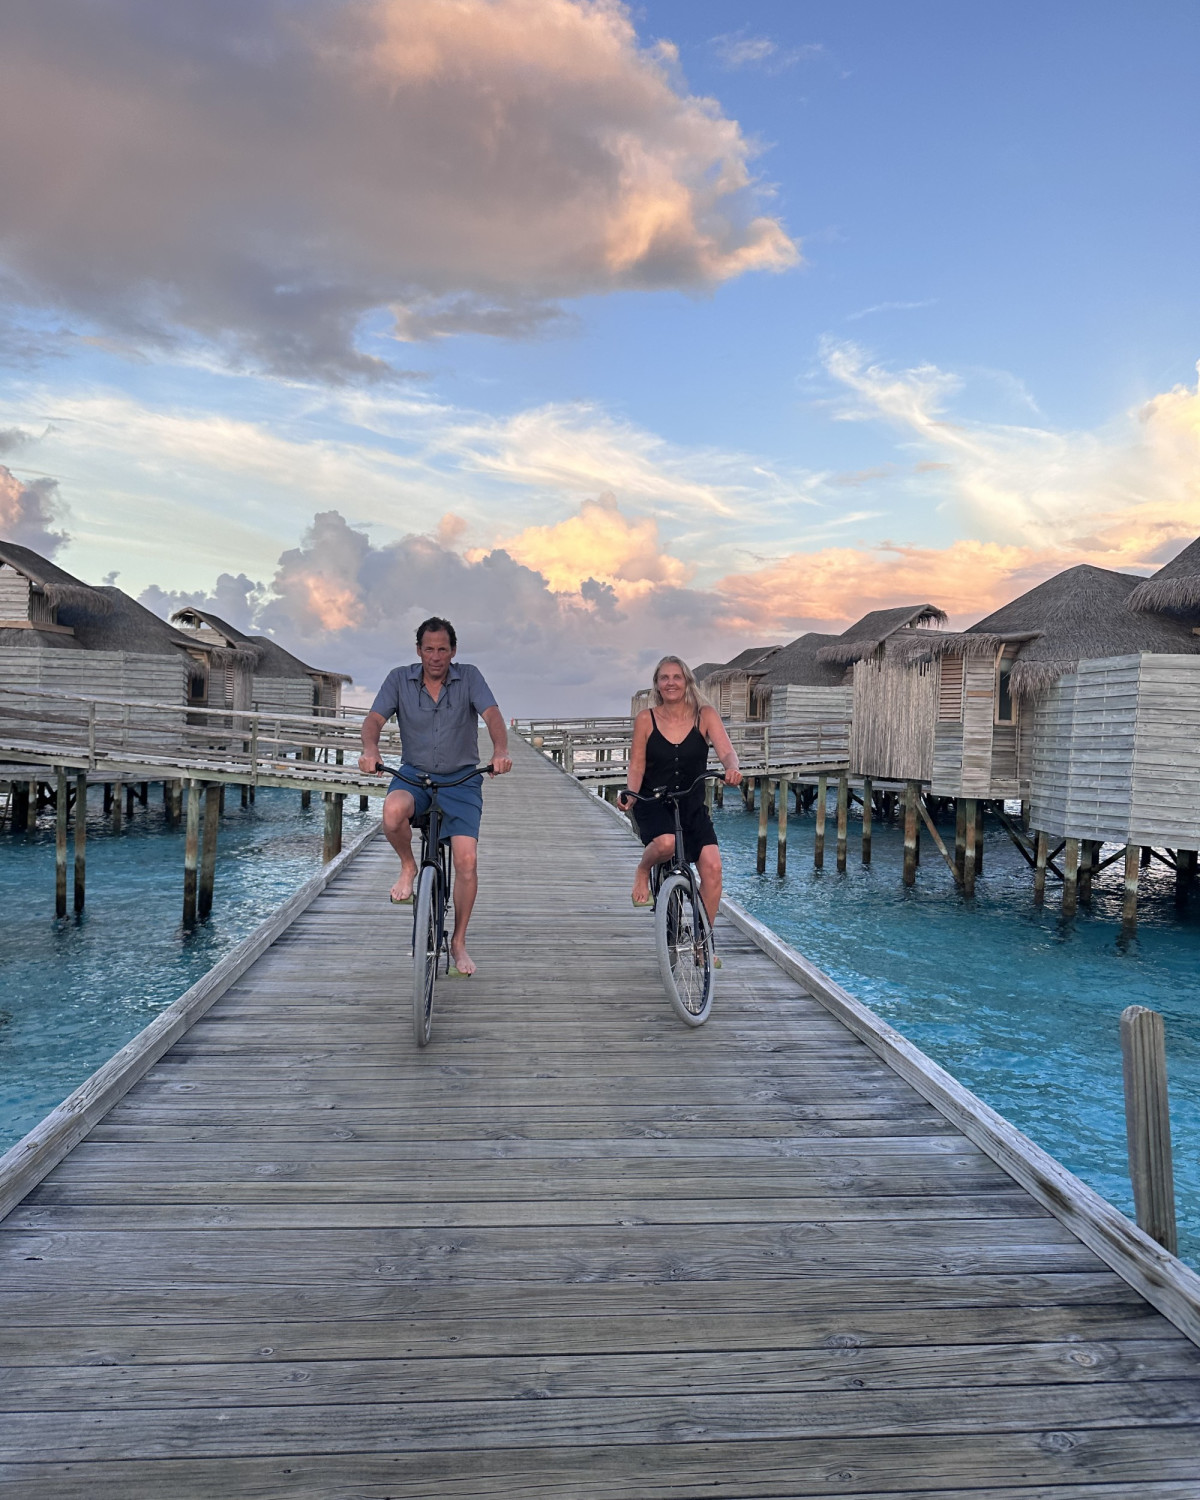 Two people cycling down a wooden bridge surrounded by beach bungalows and a beautiful cloudy sky. There is turquoise blue water on each side of the bridge too. 